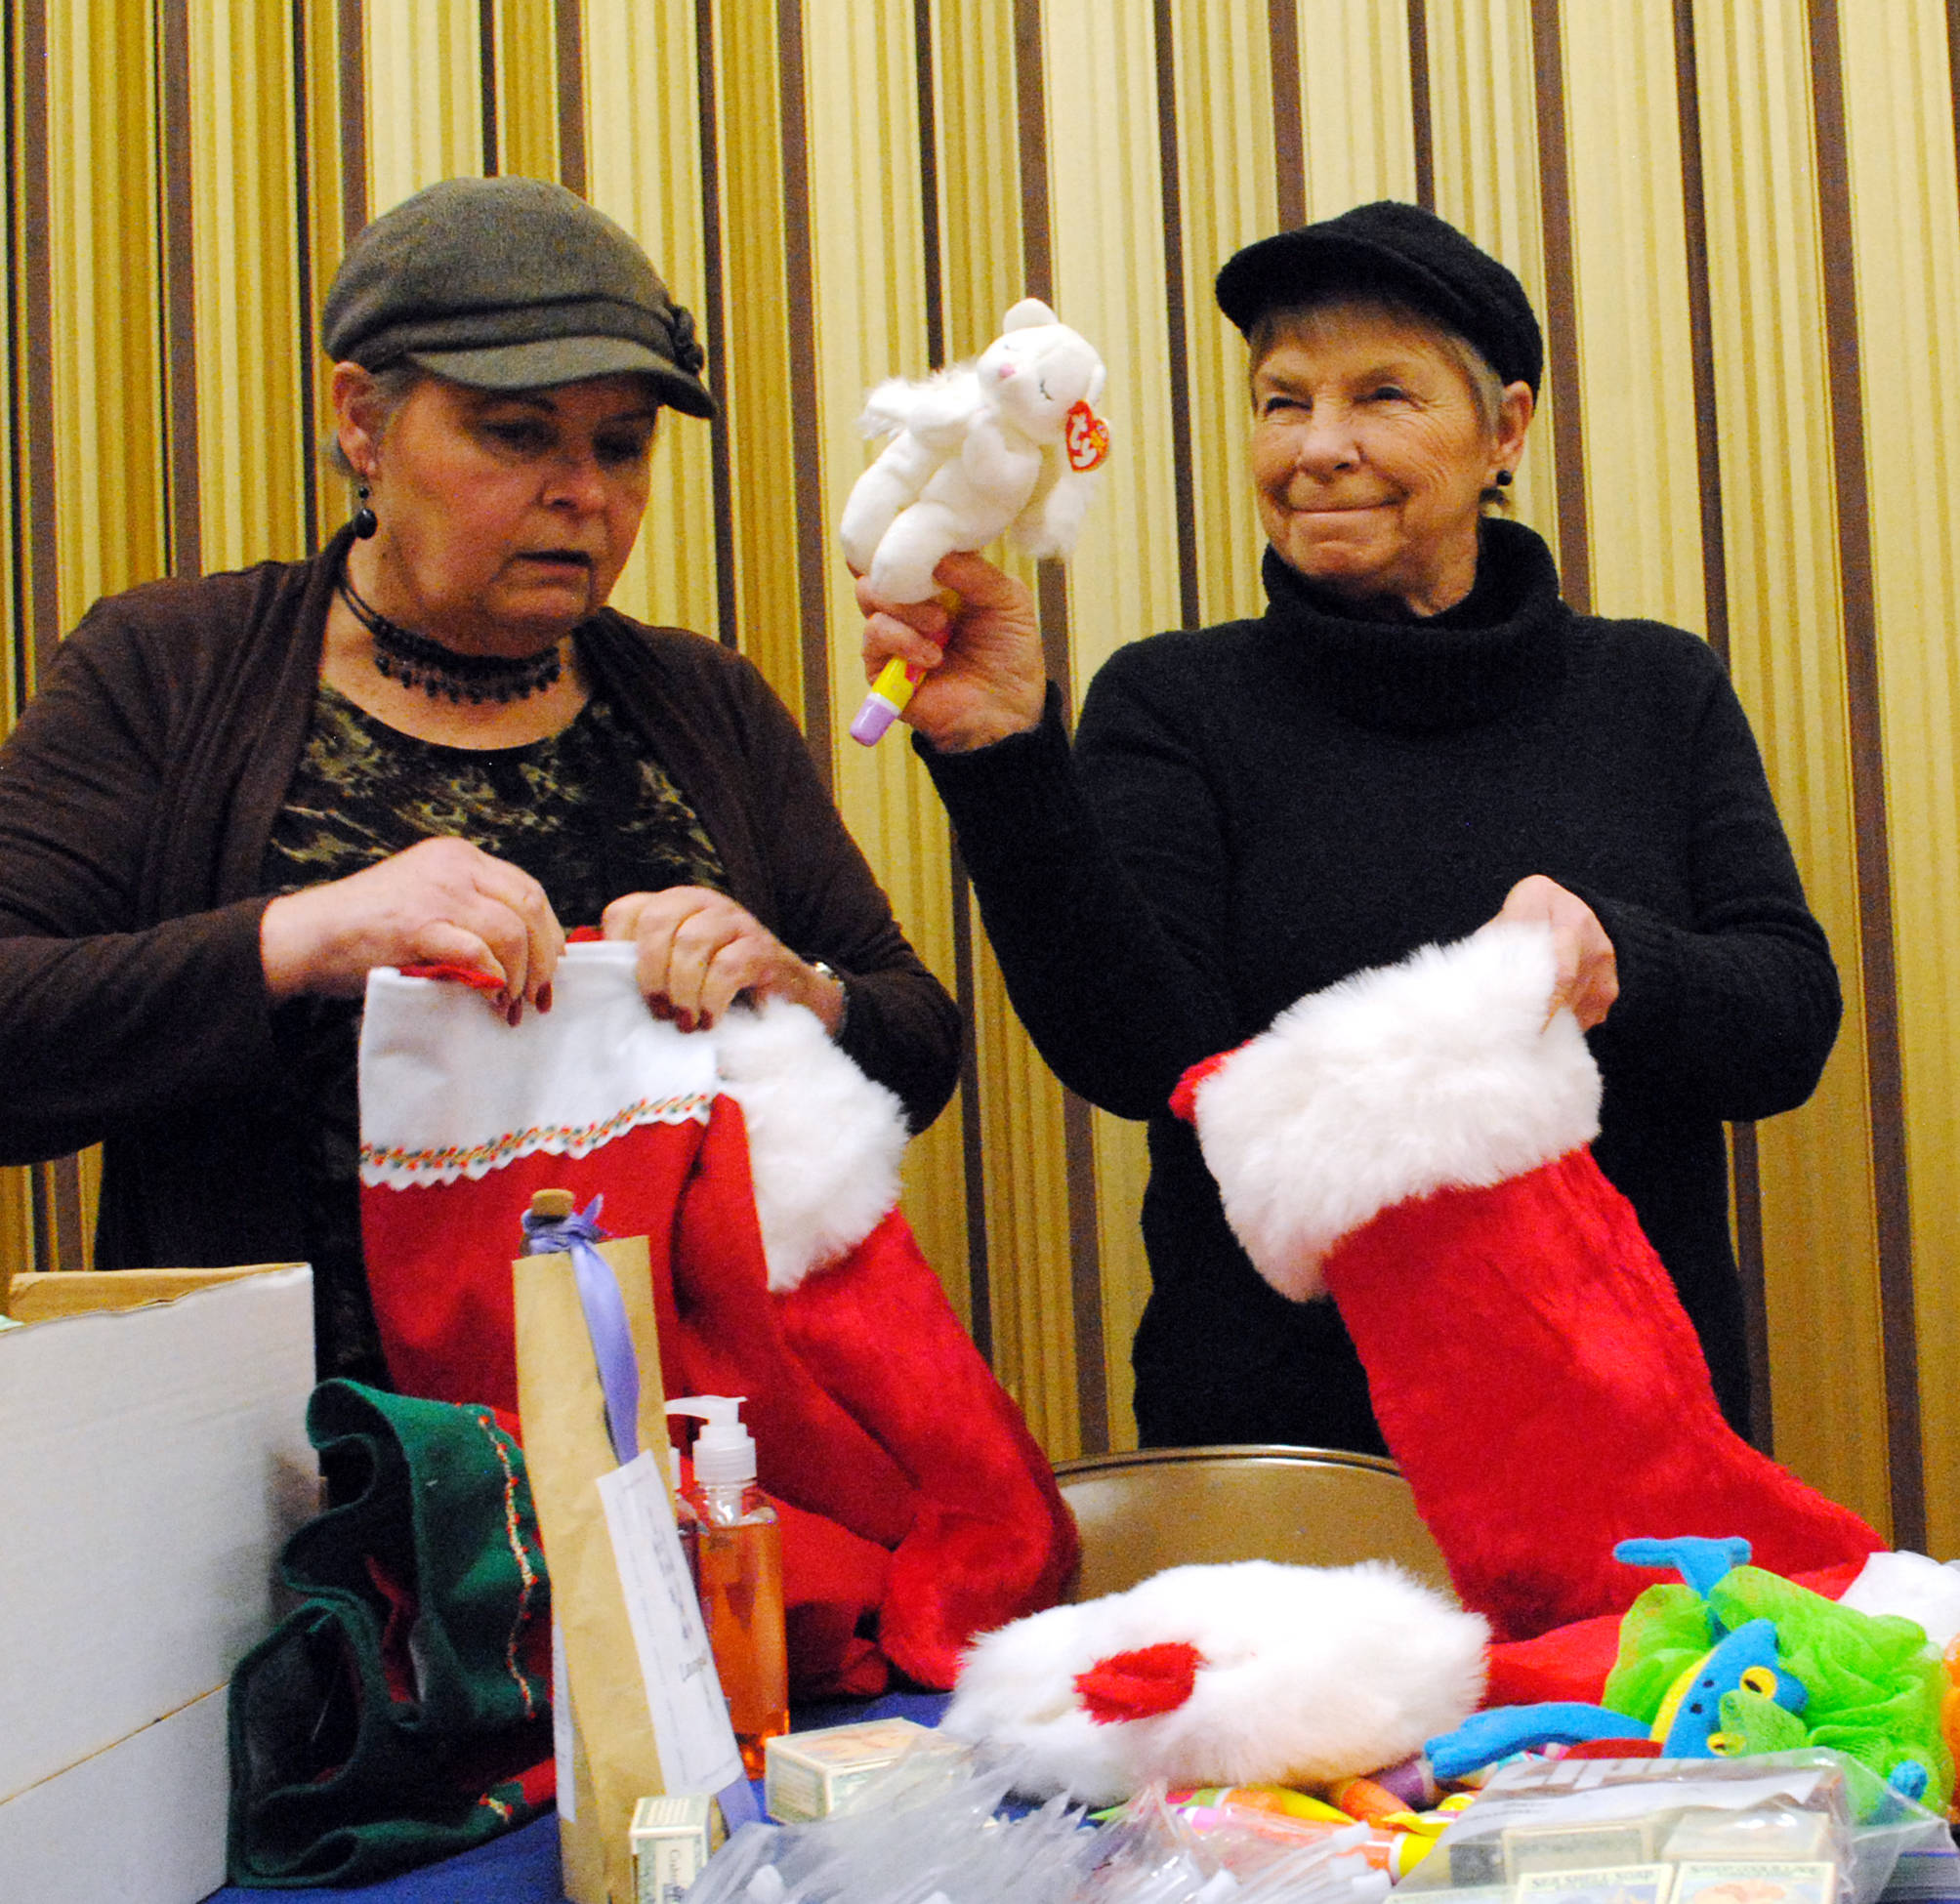 Jerri Scott, left, and Bobbi Steejes stuff stockings with holiday gifts on Thursday, Nov. 30 at the LDS Church in Soldotna, AK. The stockings will be donated to Love In the Name of Christ of the Kenai Peninsula, an inter-denominational Christian organization, which is hosting a Christmas event for families in need on Dec. 23. (Photo by Kat Sorensen/Peninsula Clarion)